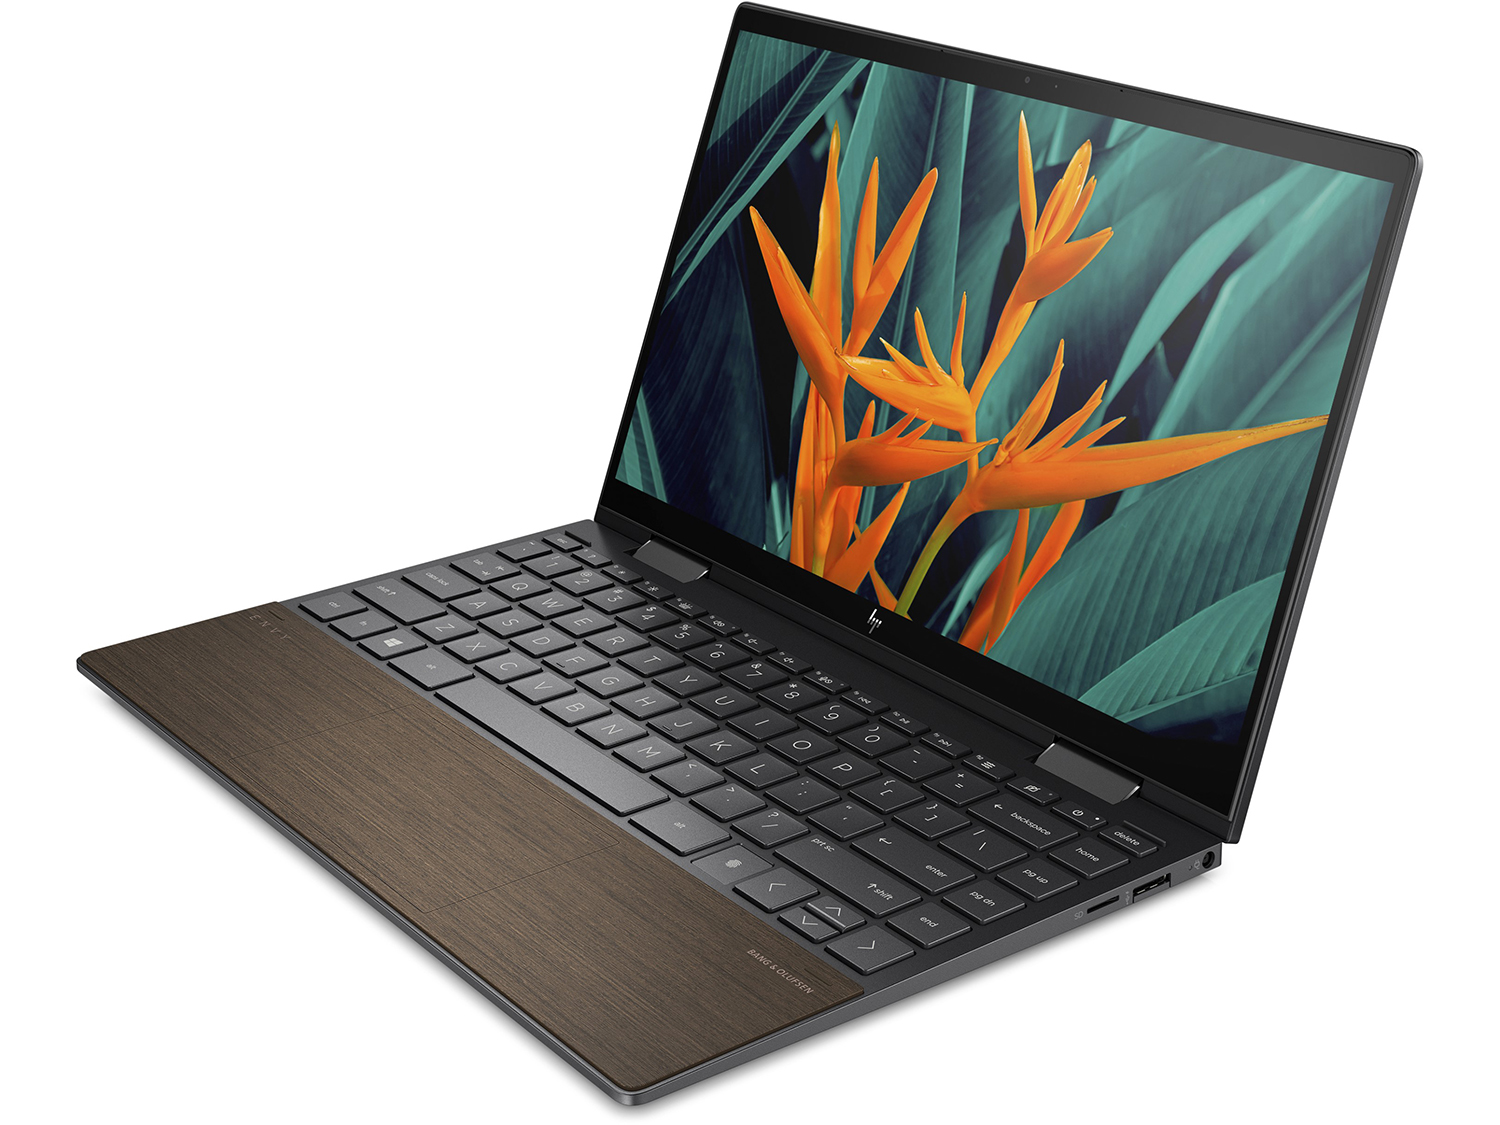 HP ENVY X360 13 (13-ay0000) - Specs, Tests, and Prices 